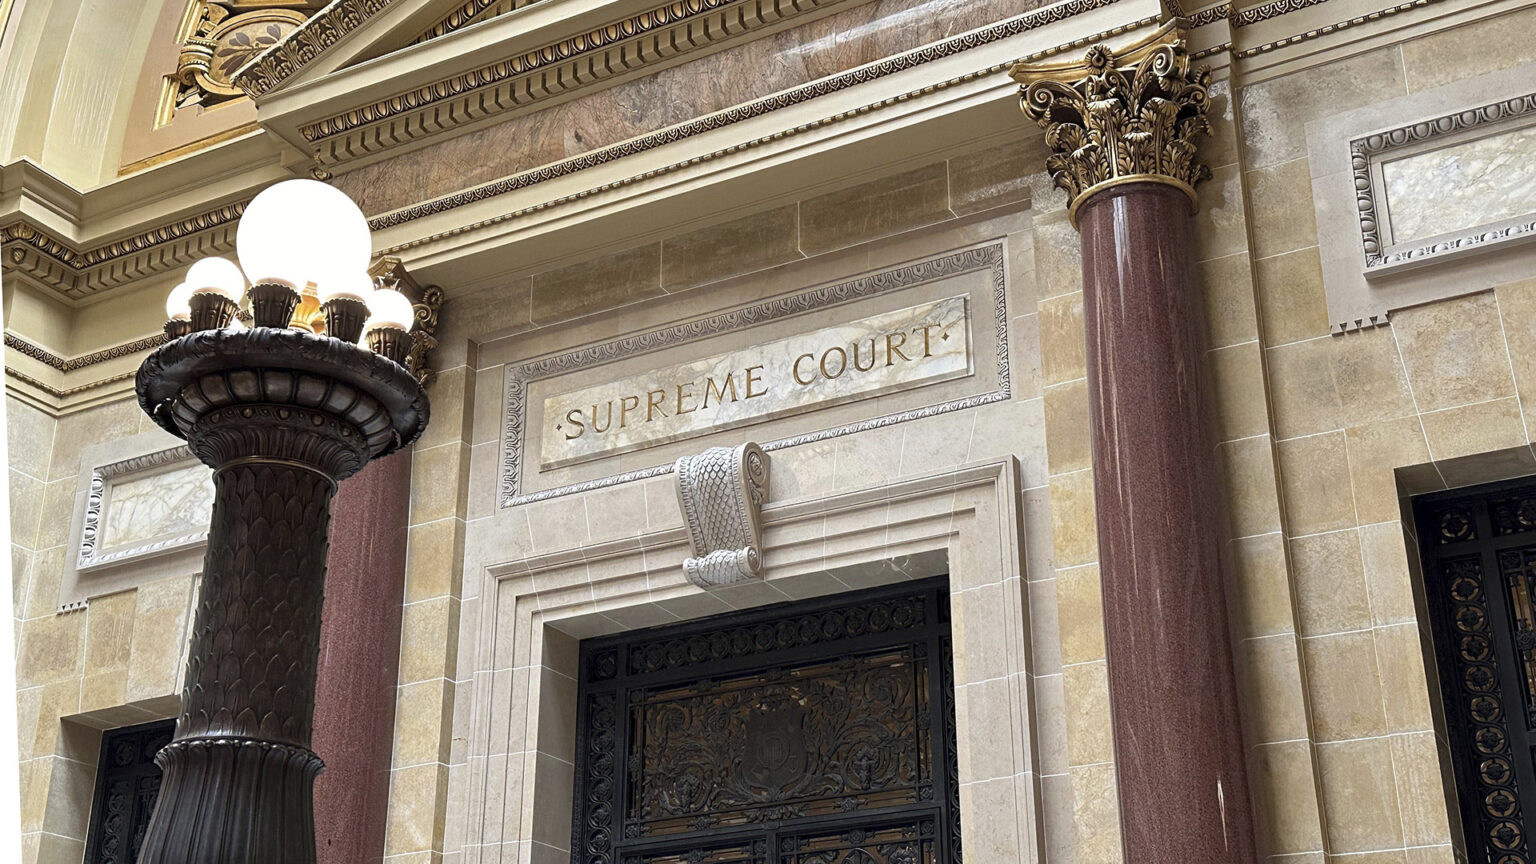 Marble pillars with Composite order capitals frame a doorway in a marble masonry wall with a carved sign reading Supreme Court above a metal filigree door, with additional doors on either side, a pediment above, and a brass pillar electric light fixture in the foreground.